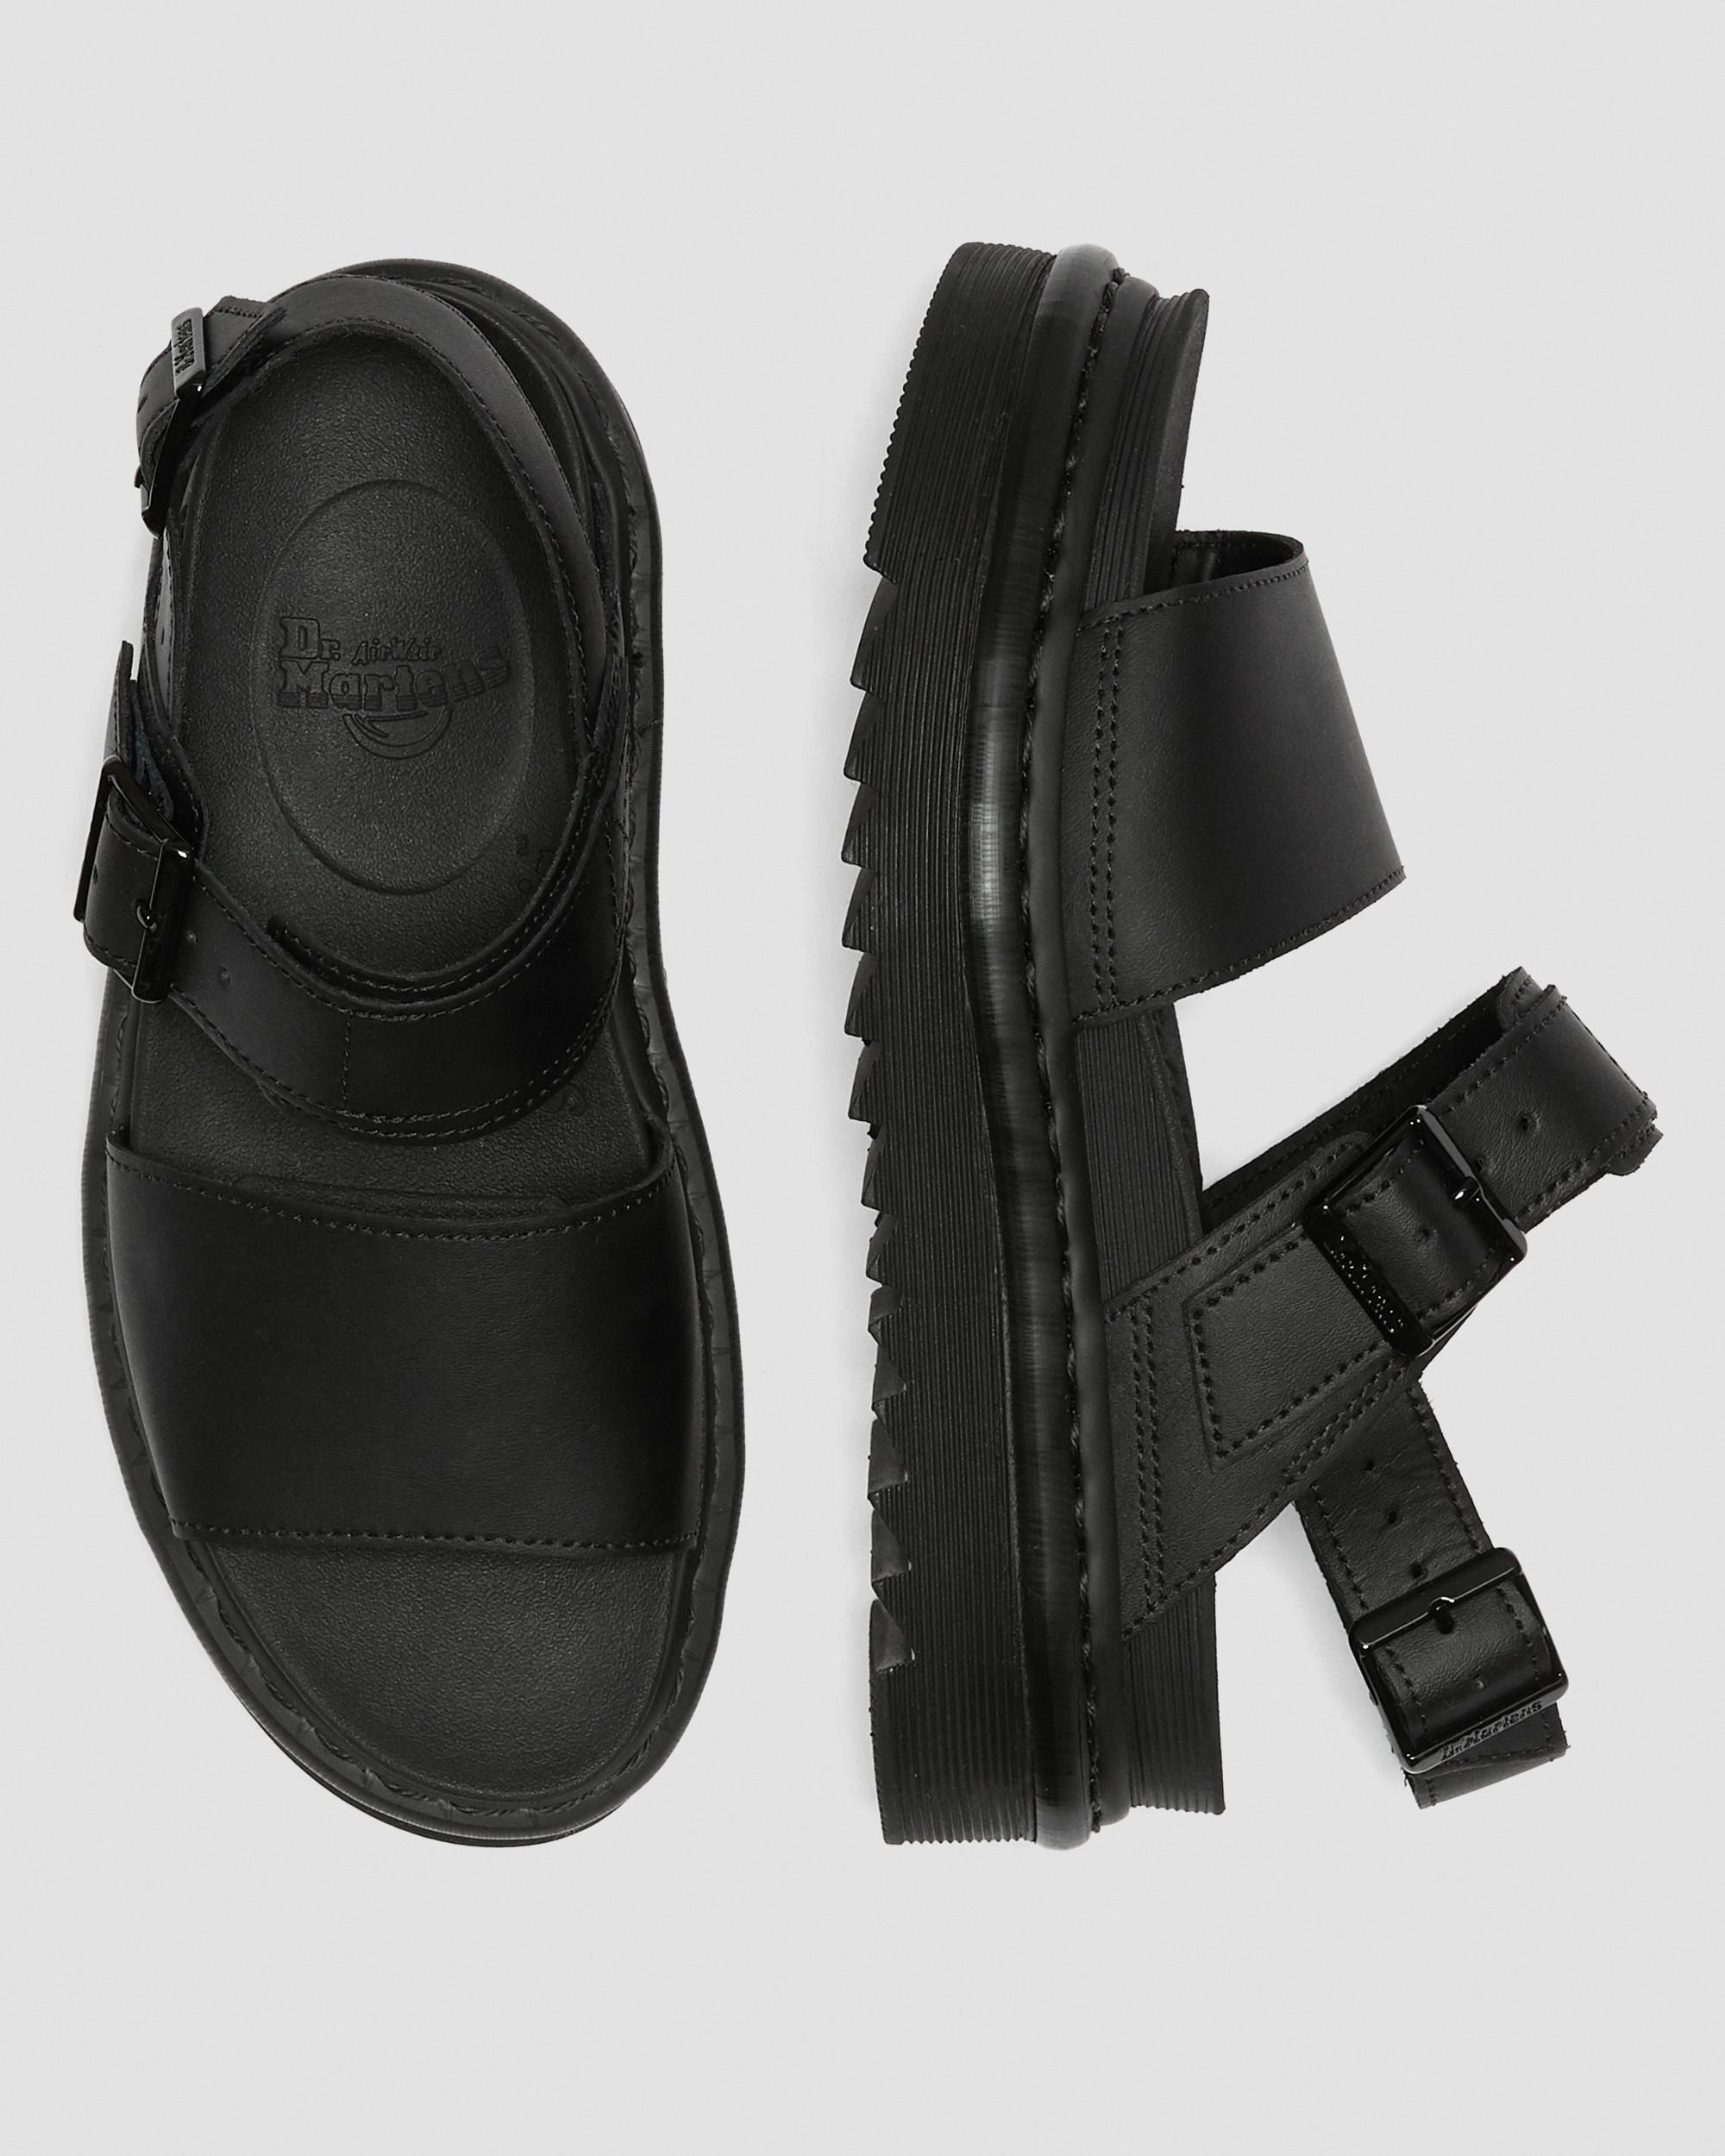 Voss Hydro Leather Strap SandalsVoss Hydro Leather Strap Sandals Dr. Martens